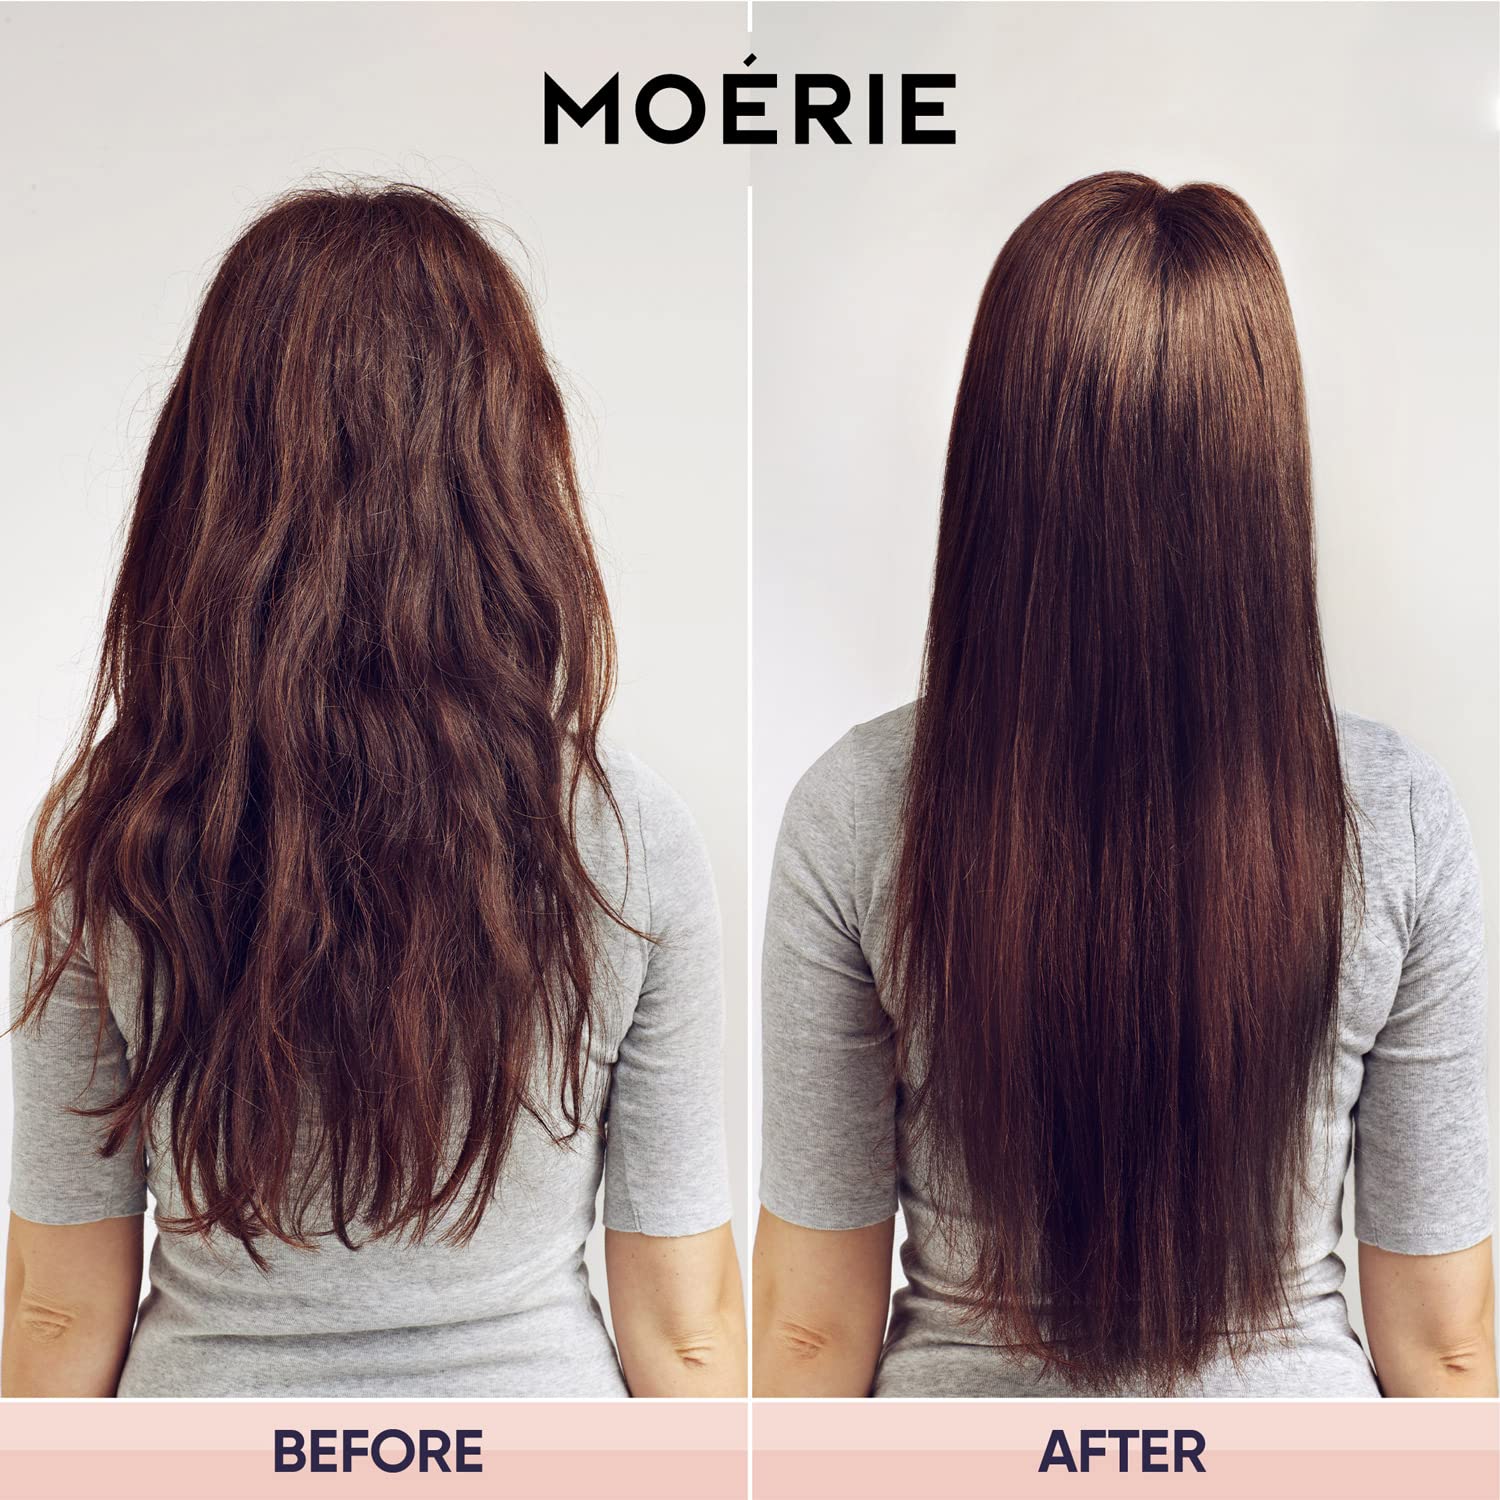 Moerie Volumizing Shampoo and Conditioner for Hair Loss - Hair Thickening Products with Ingredients of Natural Origin - Over 100 Active Ingredients for Thick, Long, Luscious Hair, 2 X 8.45 Fl Oz